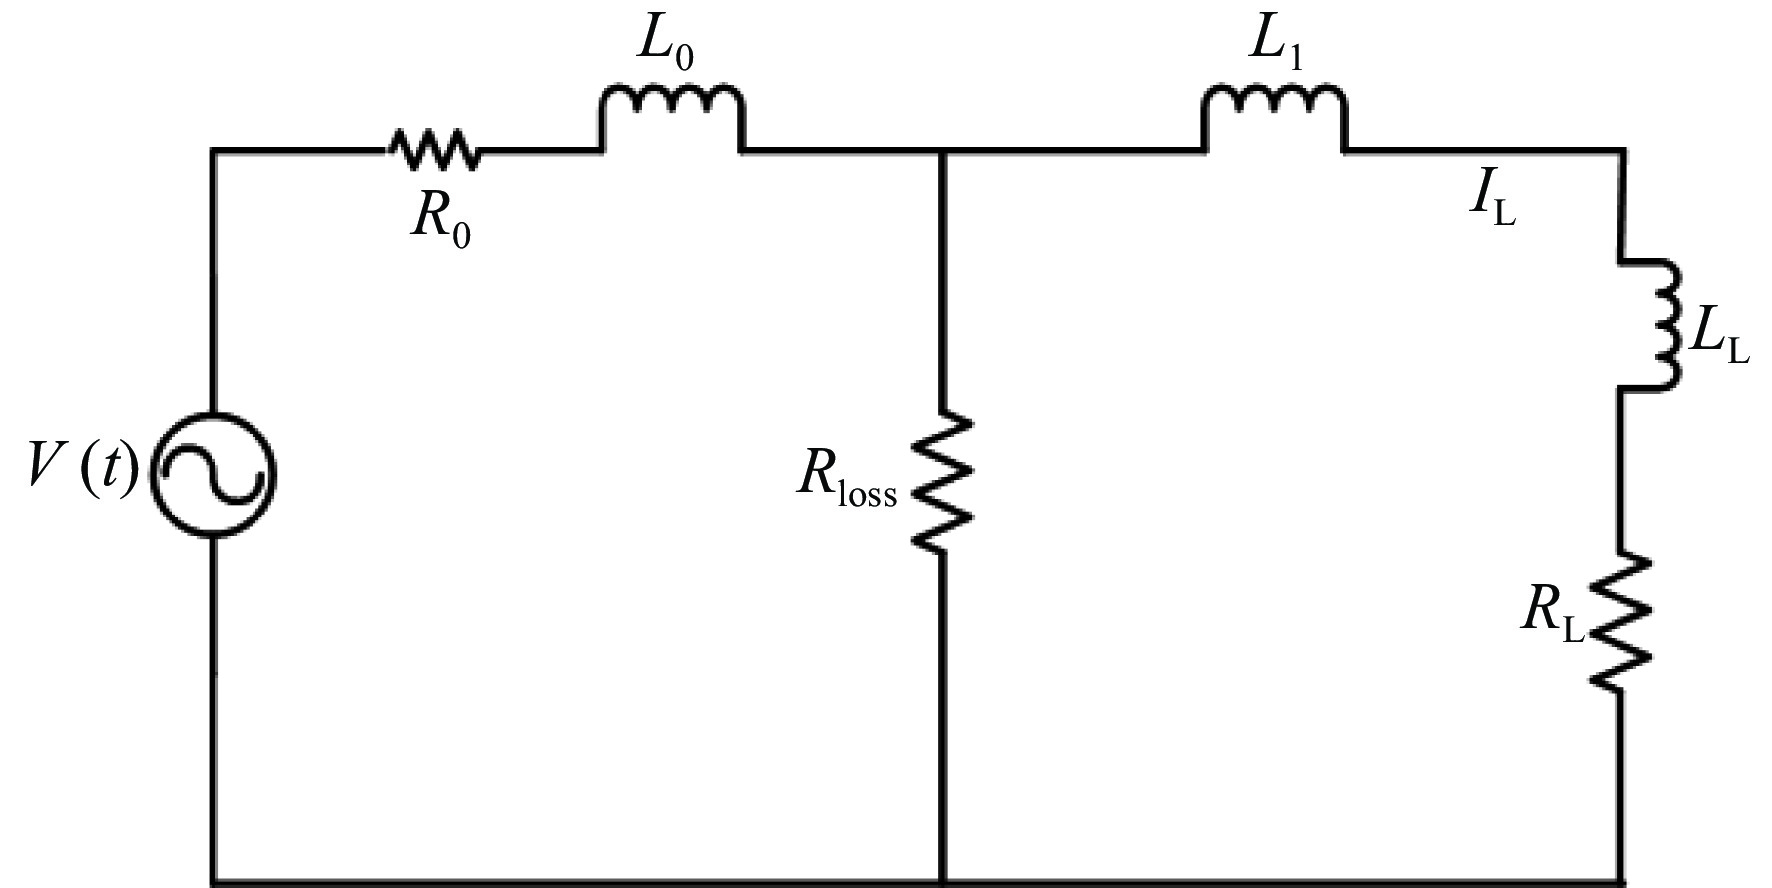 Simplified equivalent circuit model